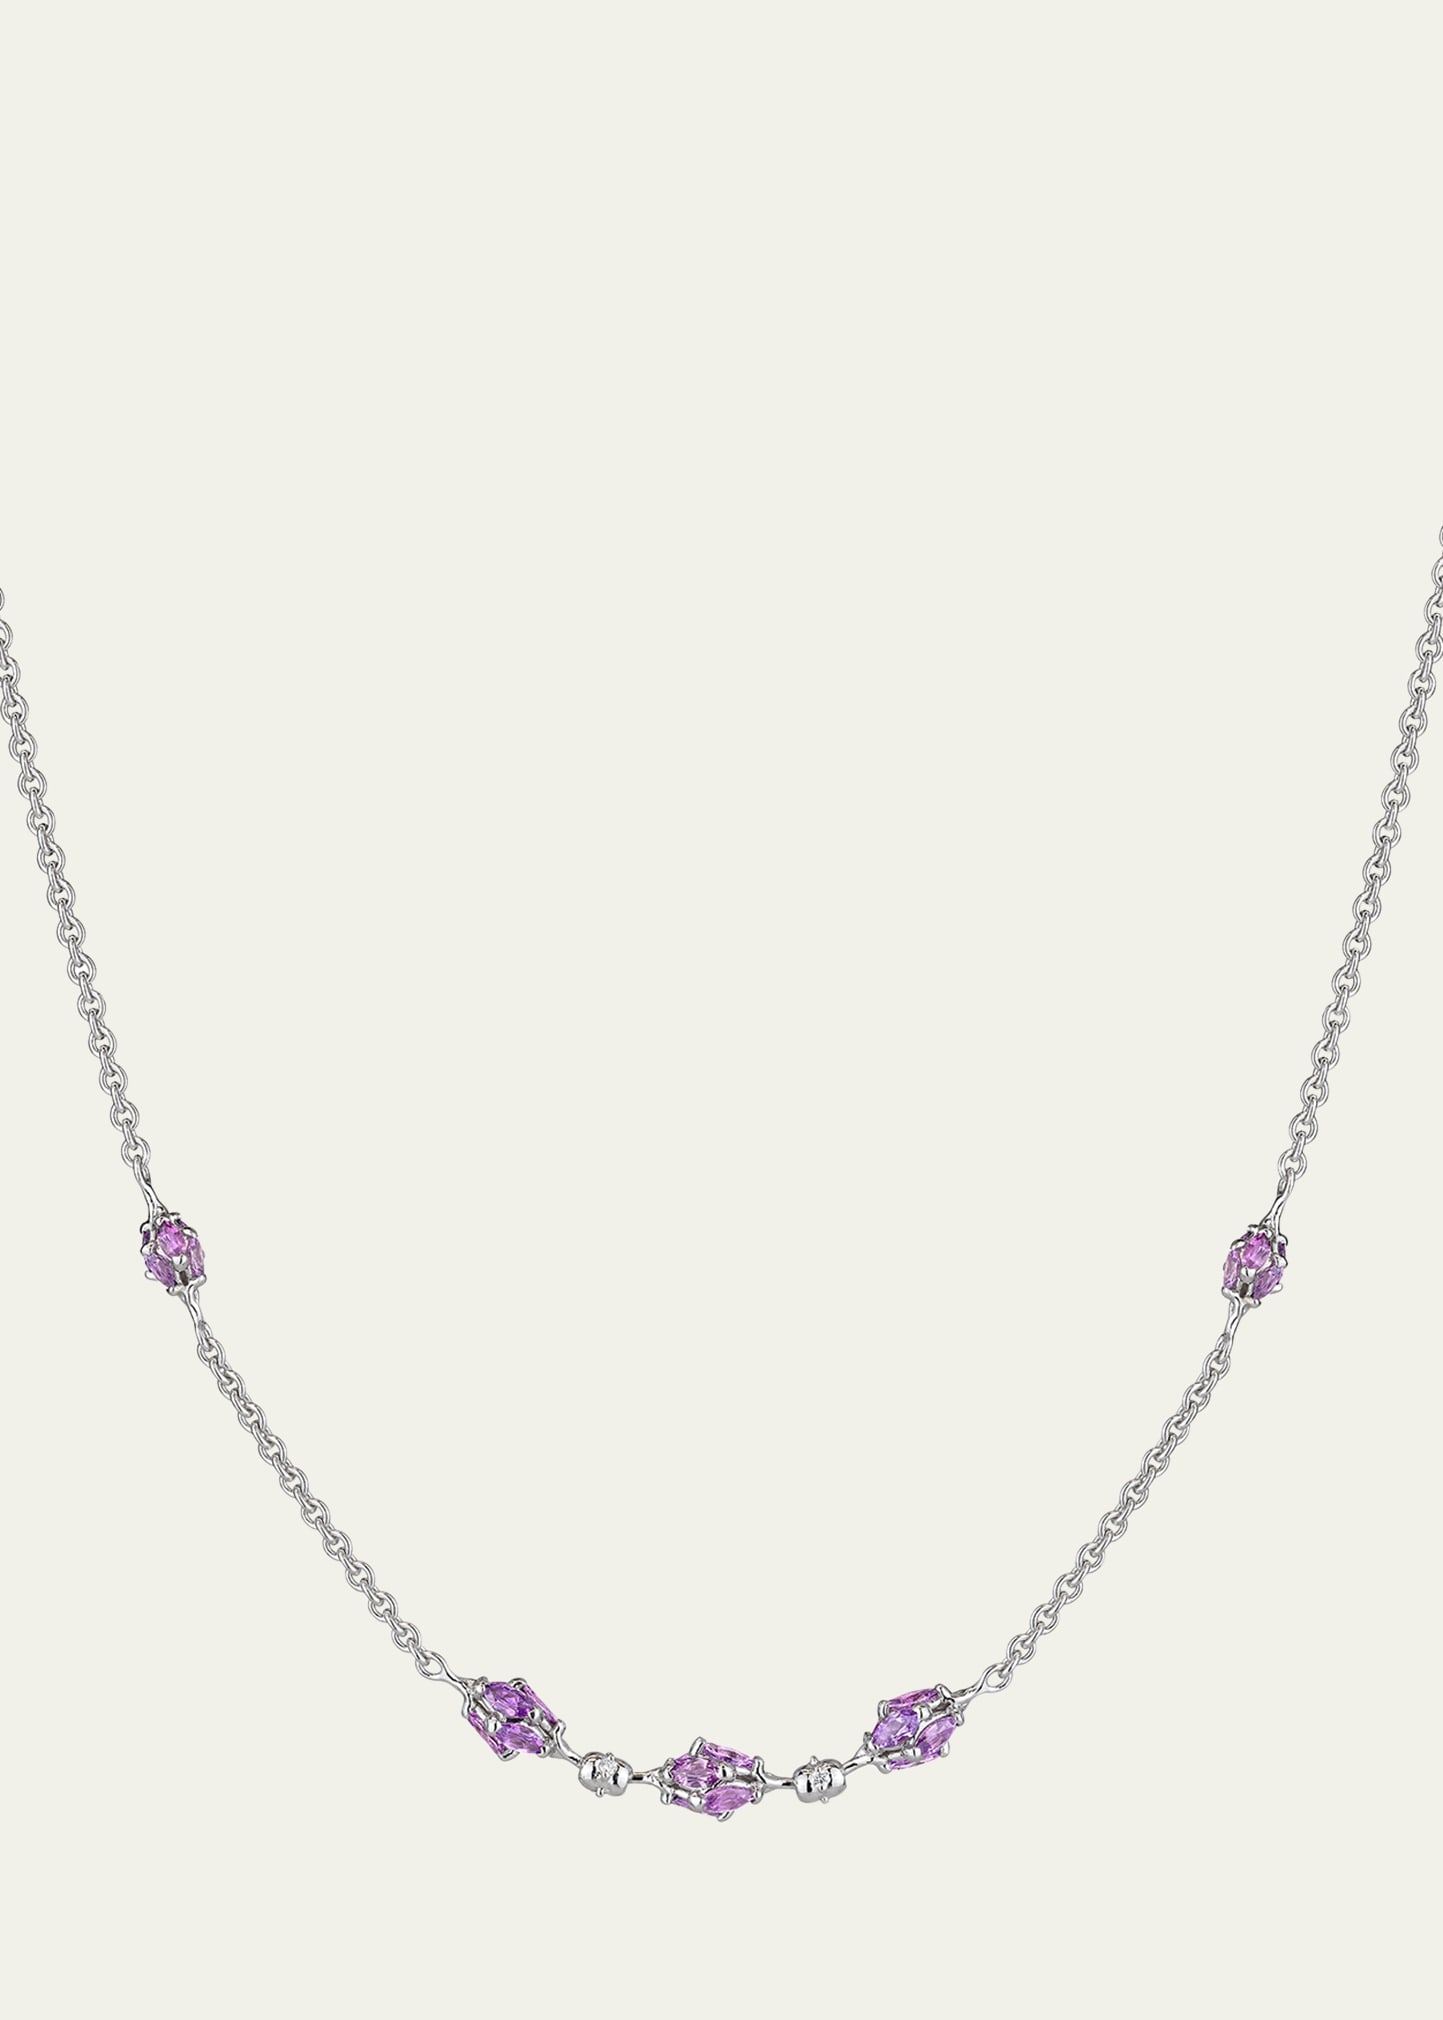 18K White Gold Dahlia Spinner Necklace with Diamonds and Purple Sapphires, 18"L